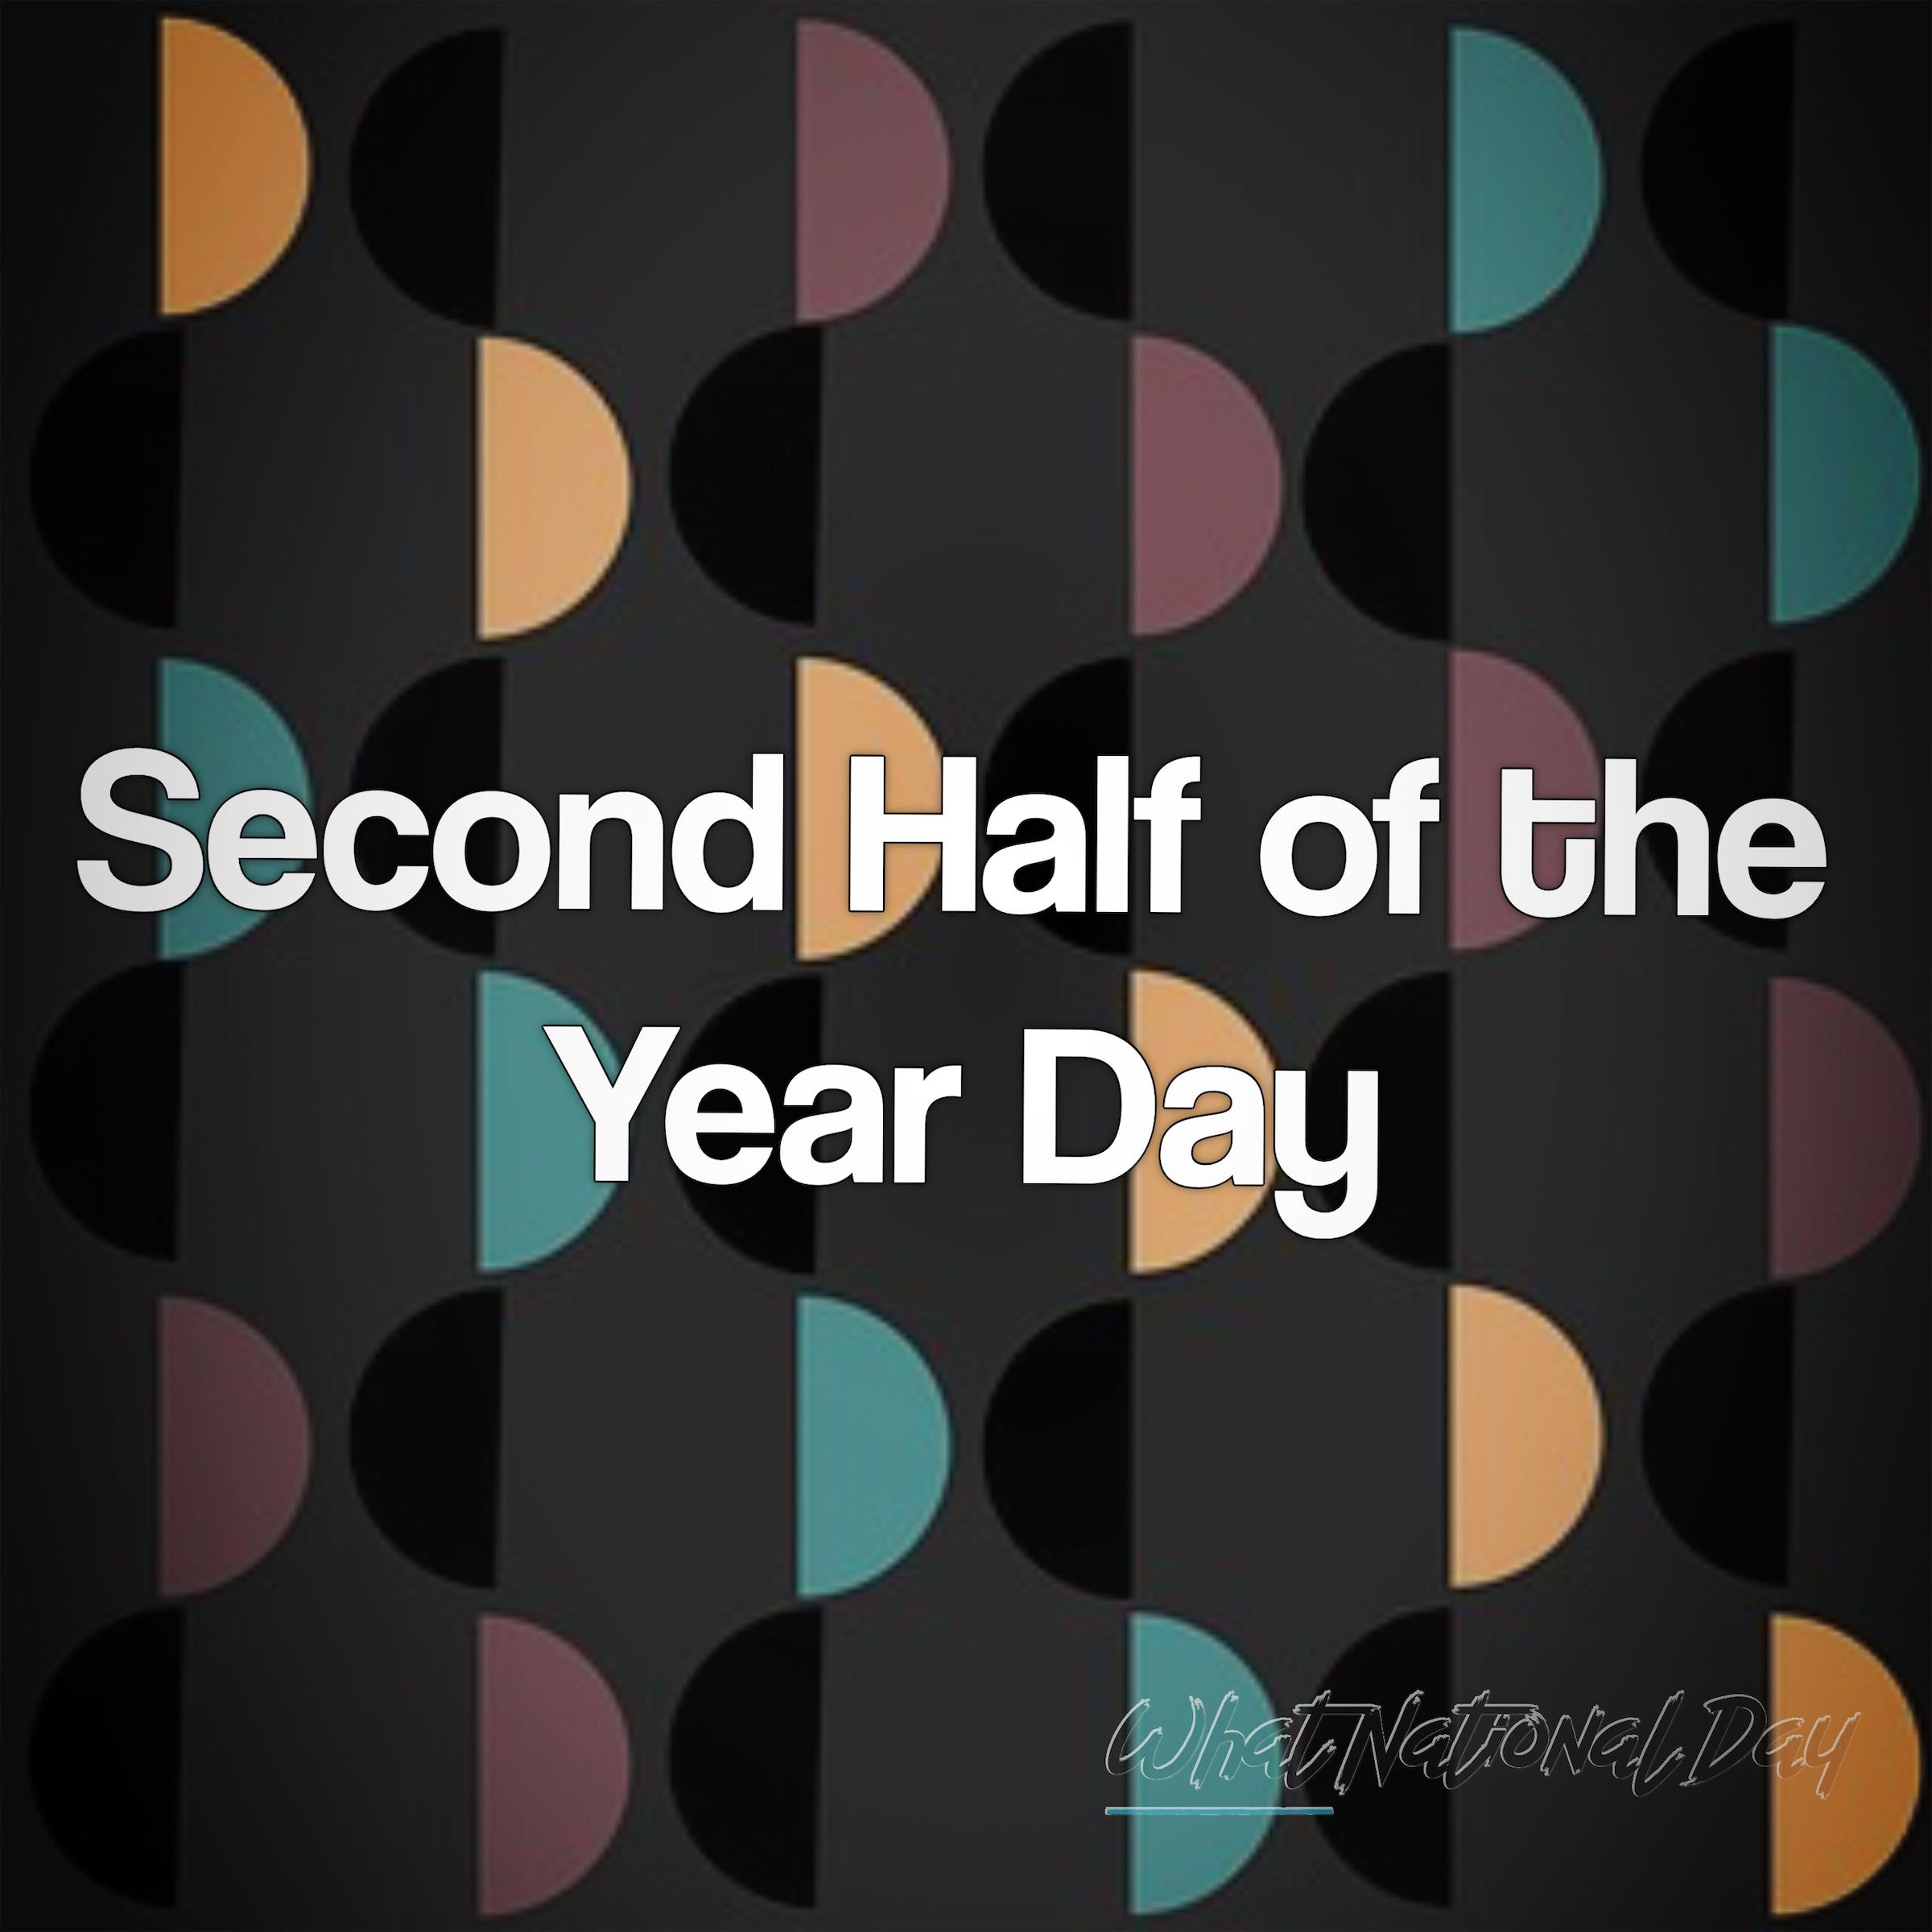 Second Half of the Year Day